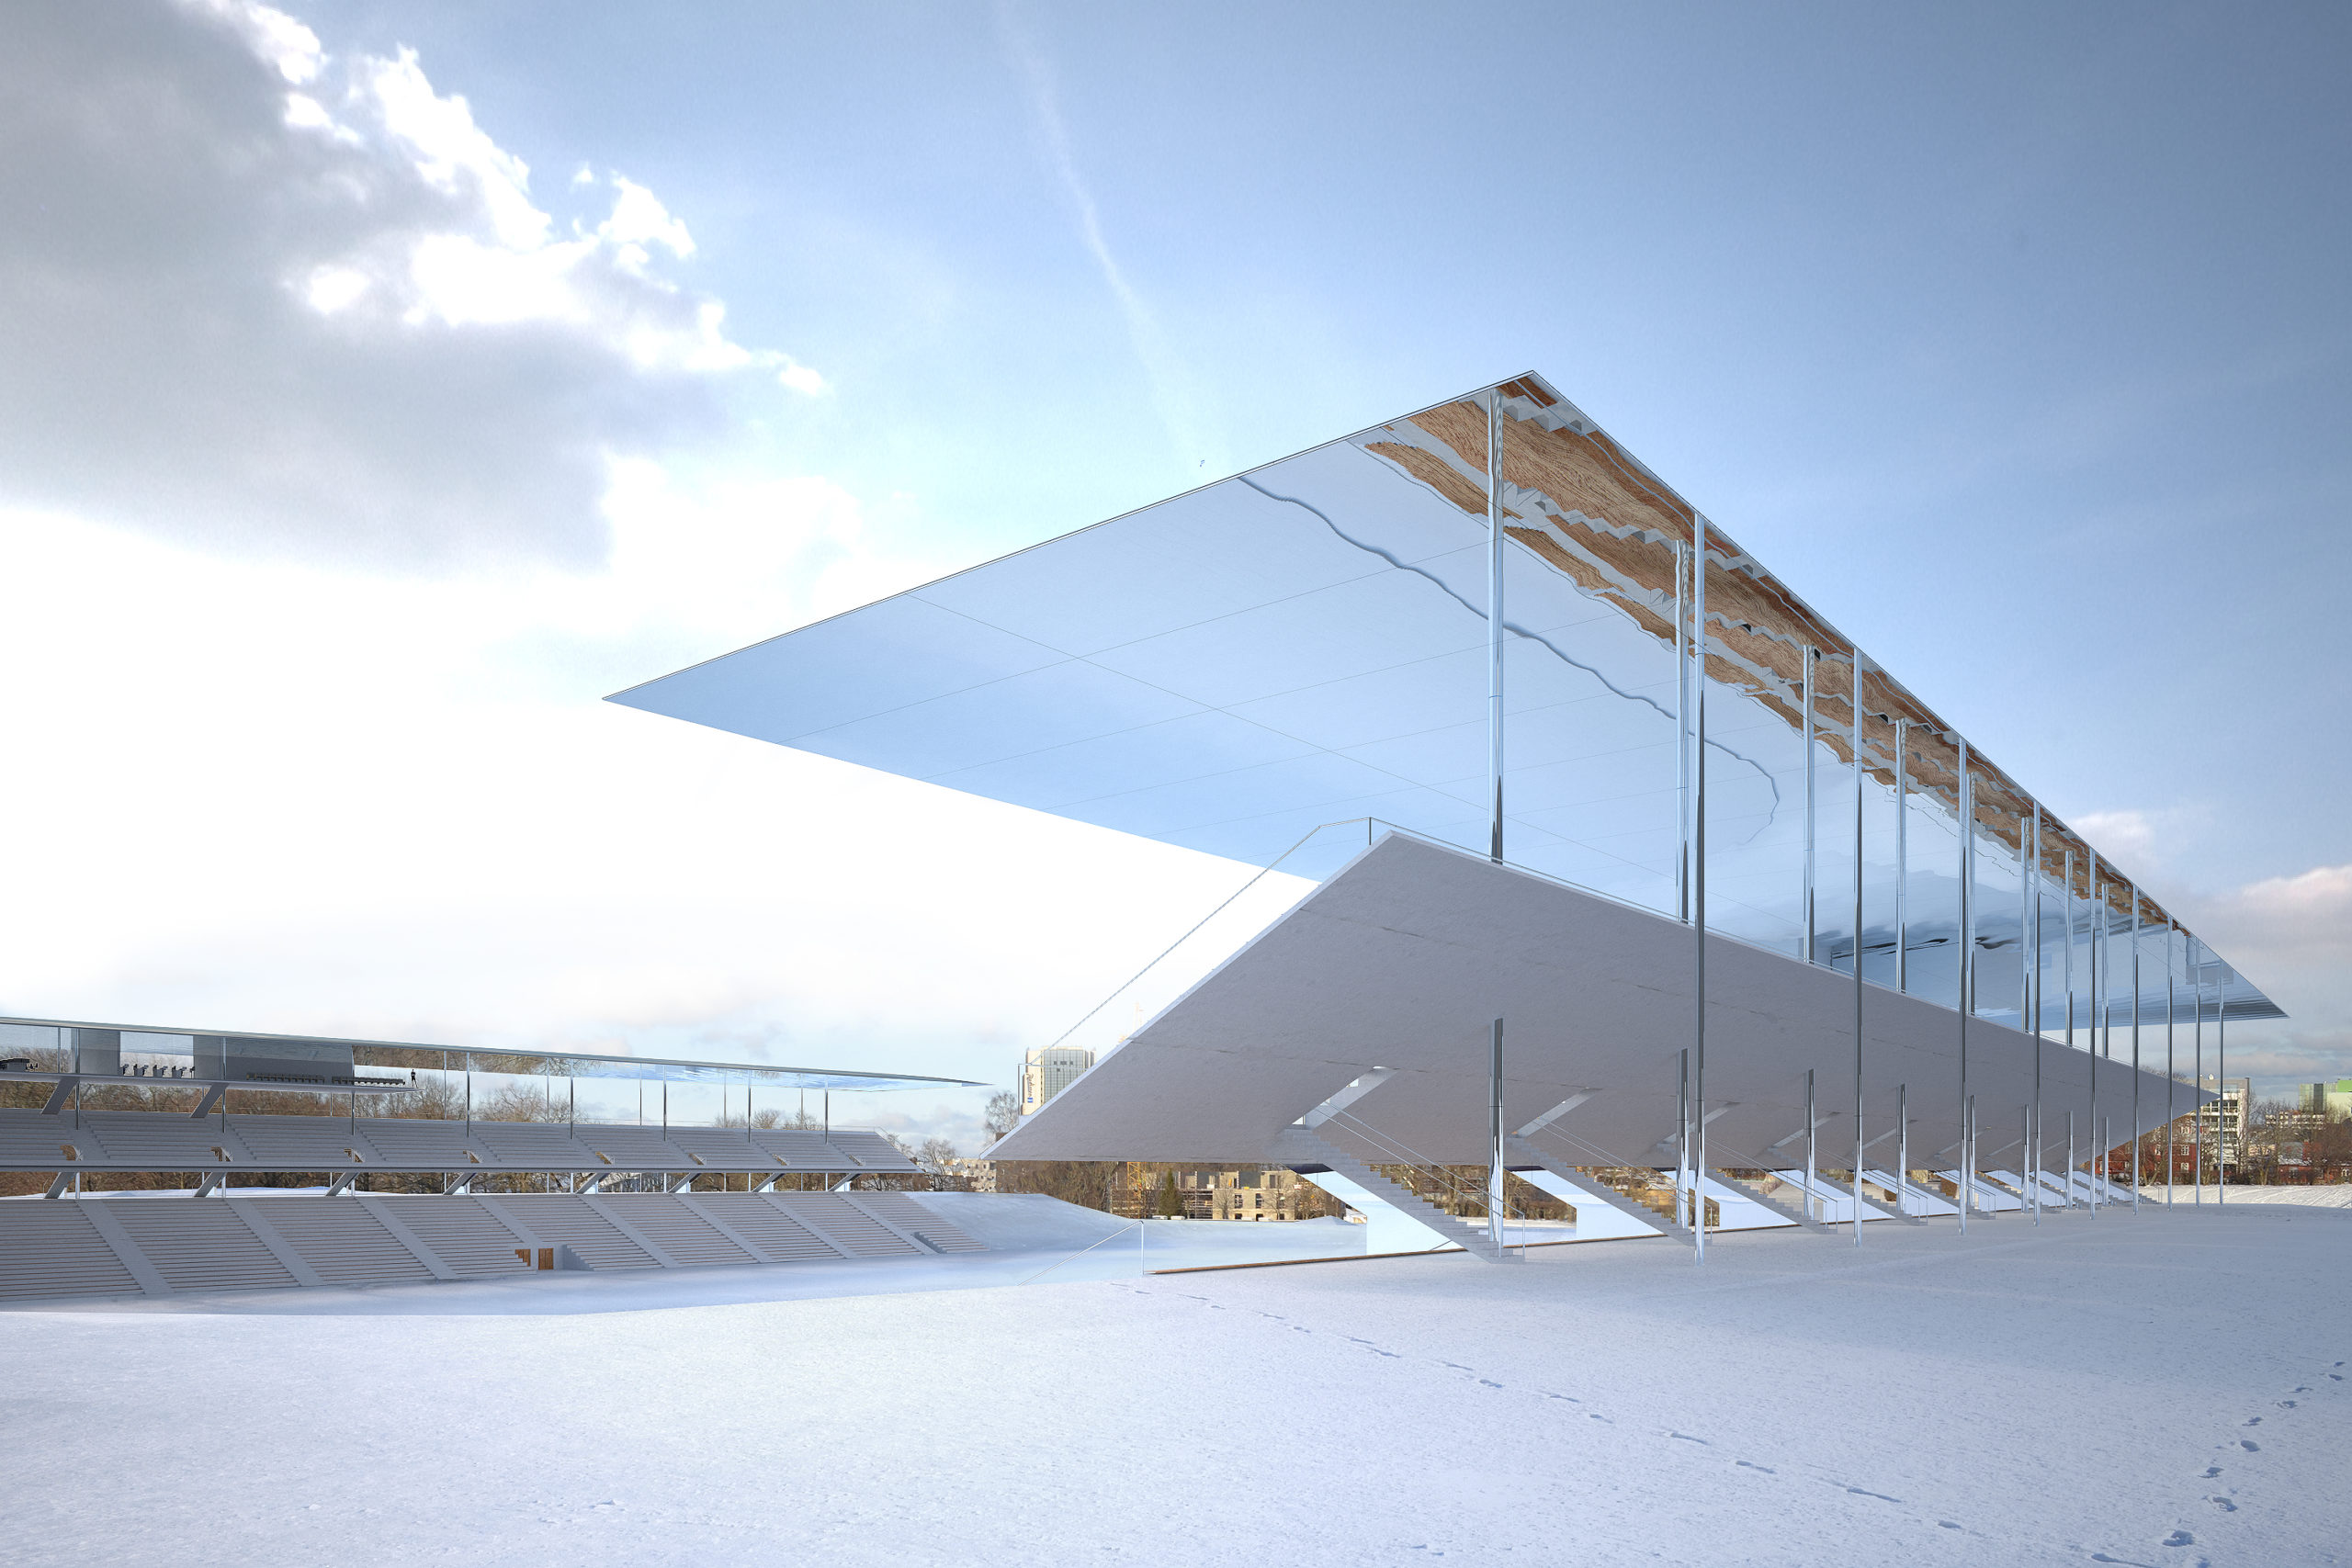 Kalev Central Stadium architecture competition